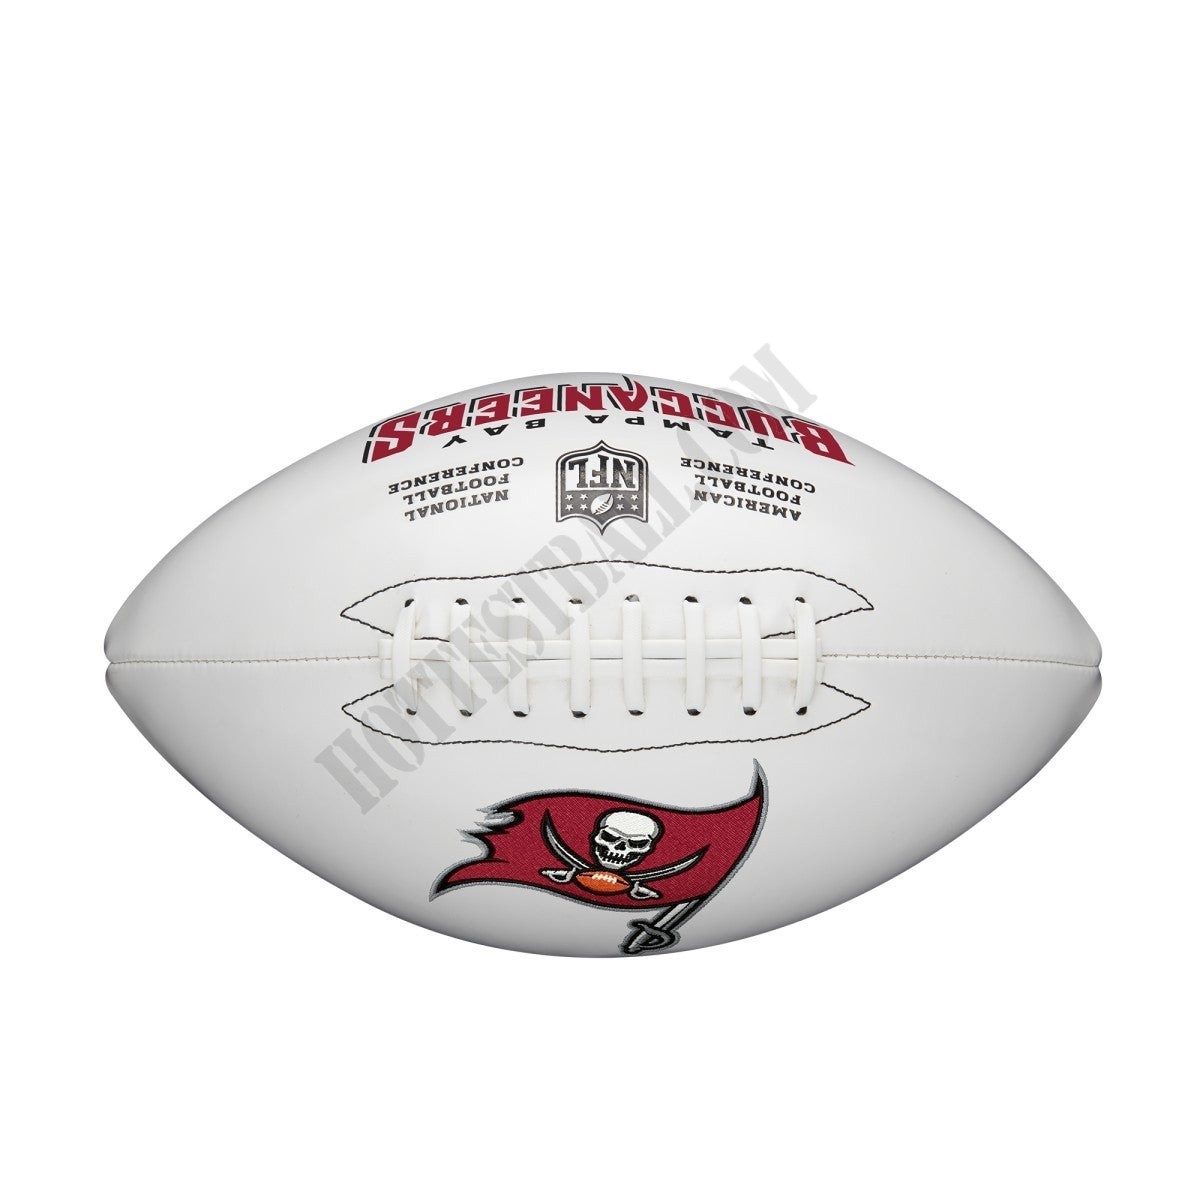 NFL Live Signature Autograph Football - Tampa Bay Buccaneers ● Wilson Promotions - -2